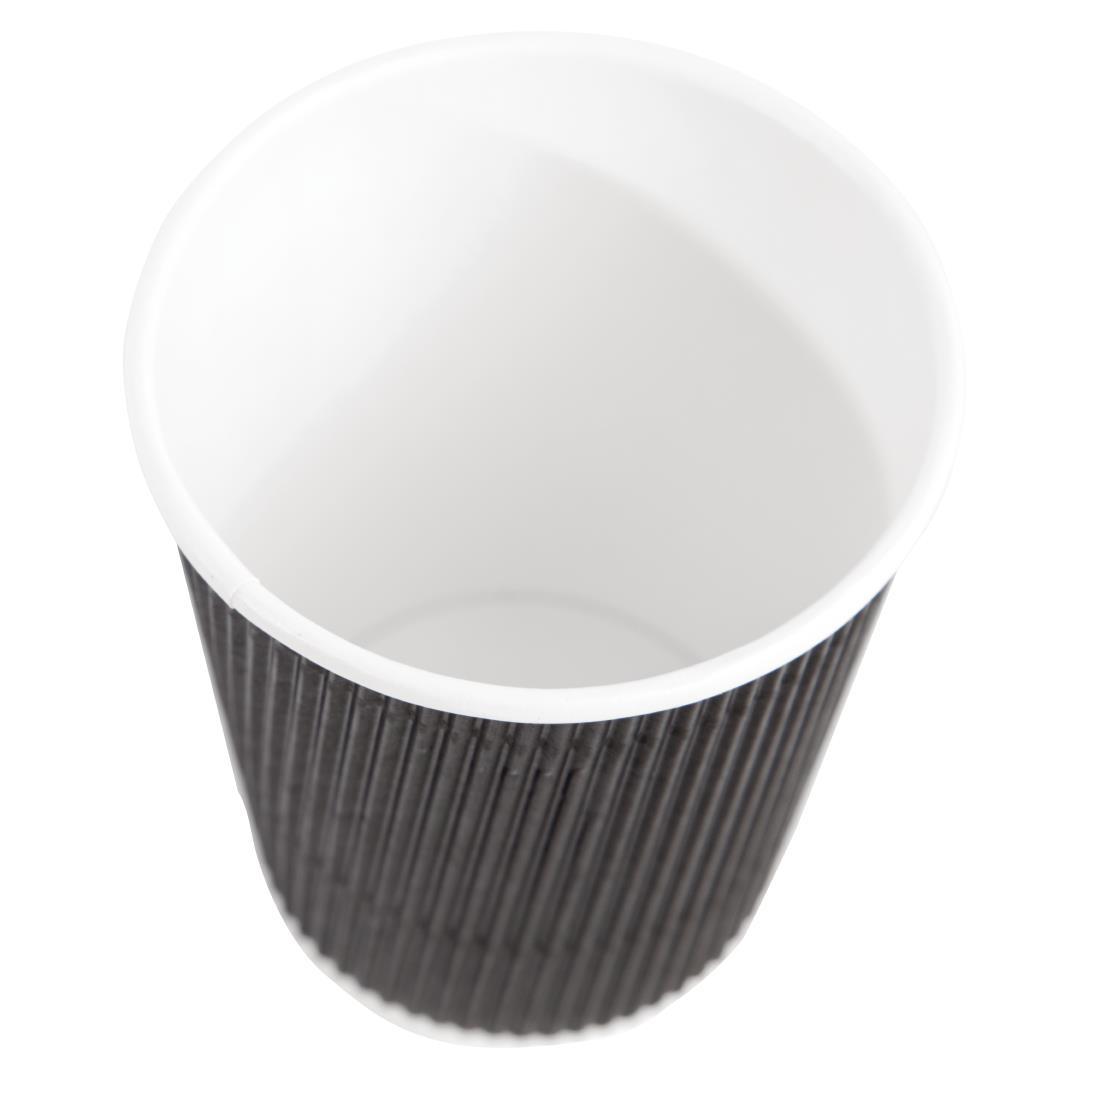 Fiesta Recyclable Coffee Cups Ripple Wall Black 225ml / 8oz (Pack of 500) - CM543  - 3